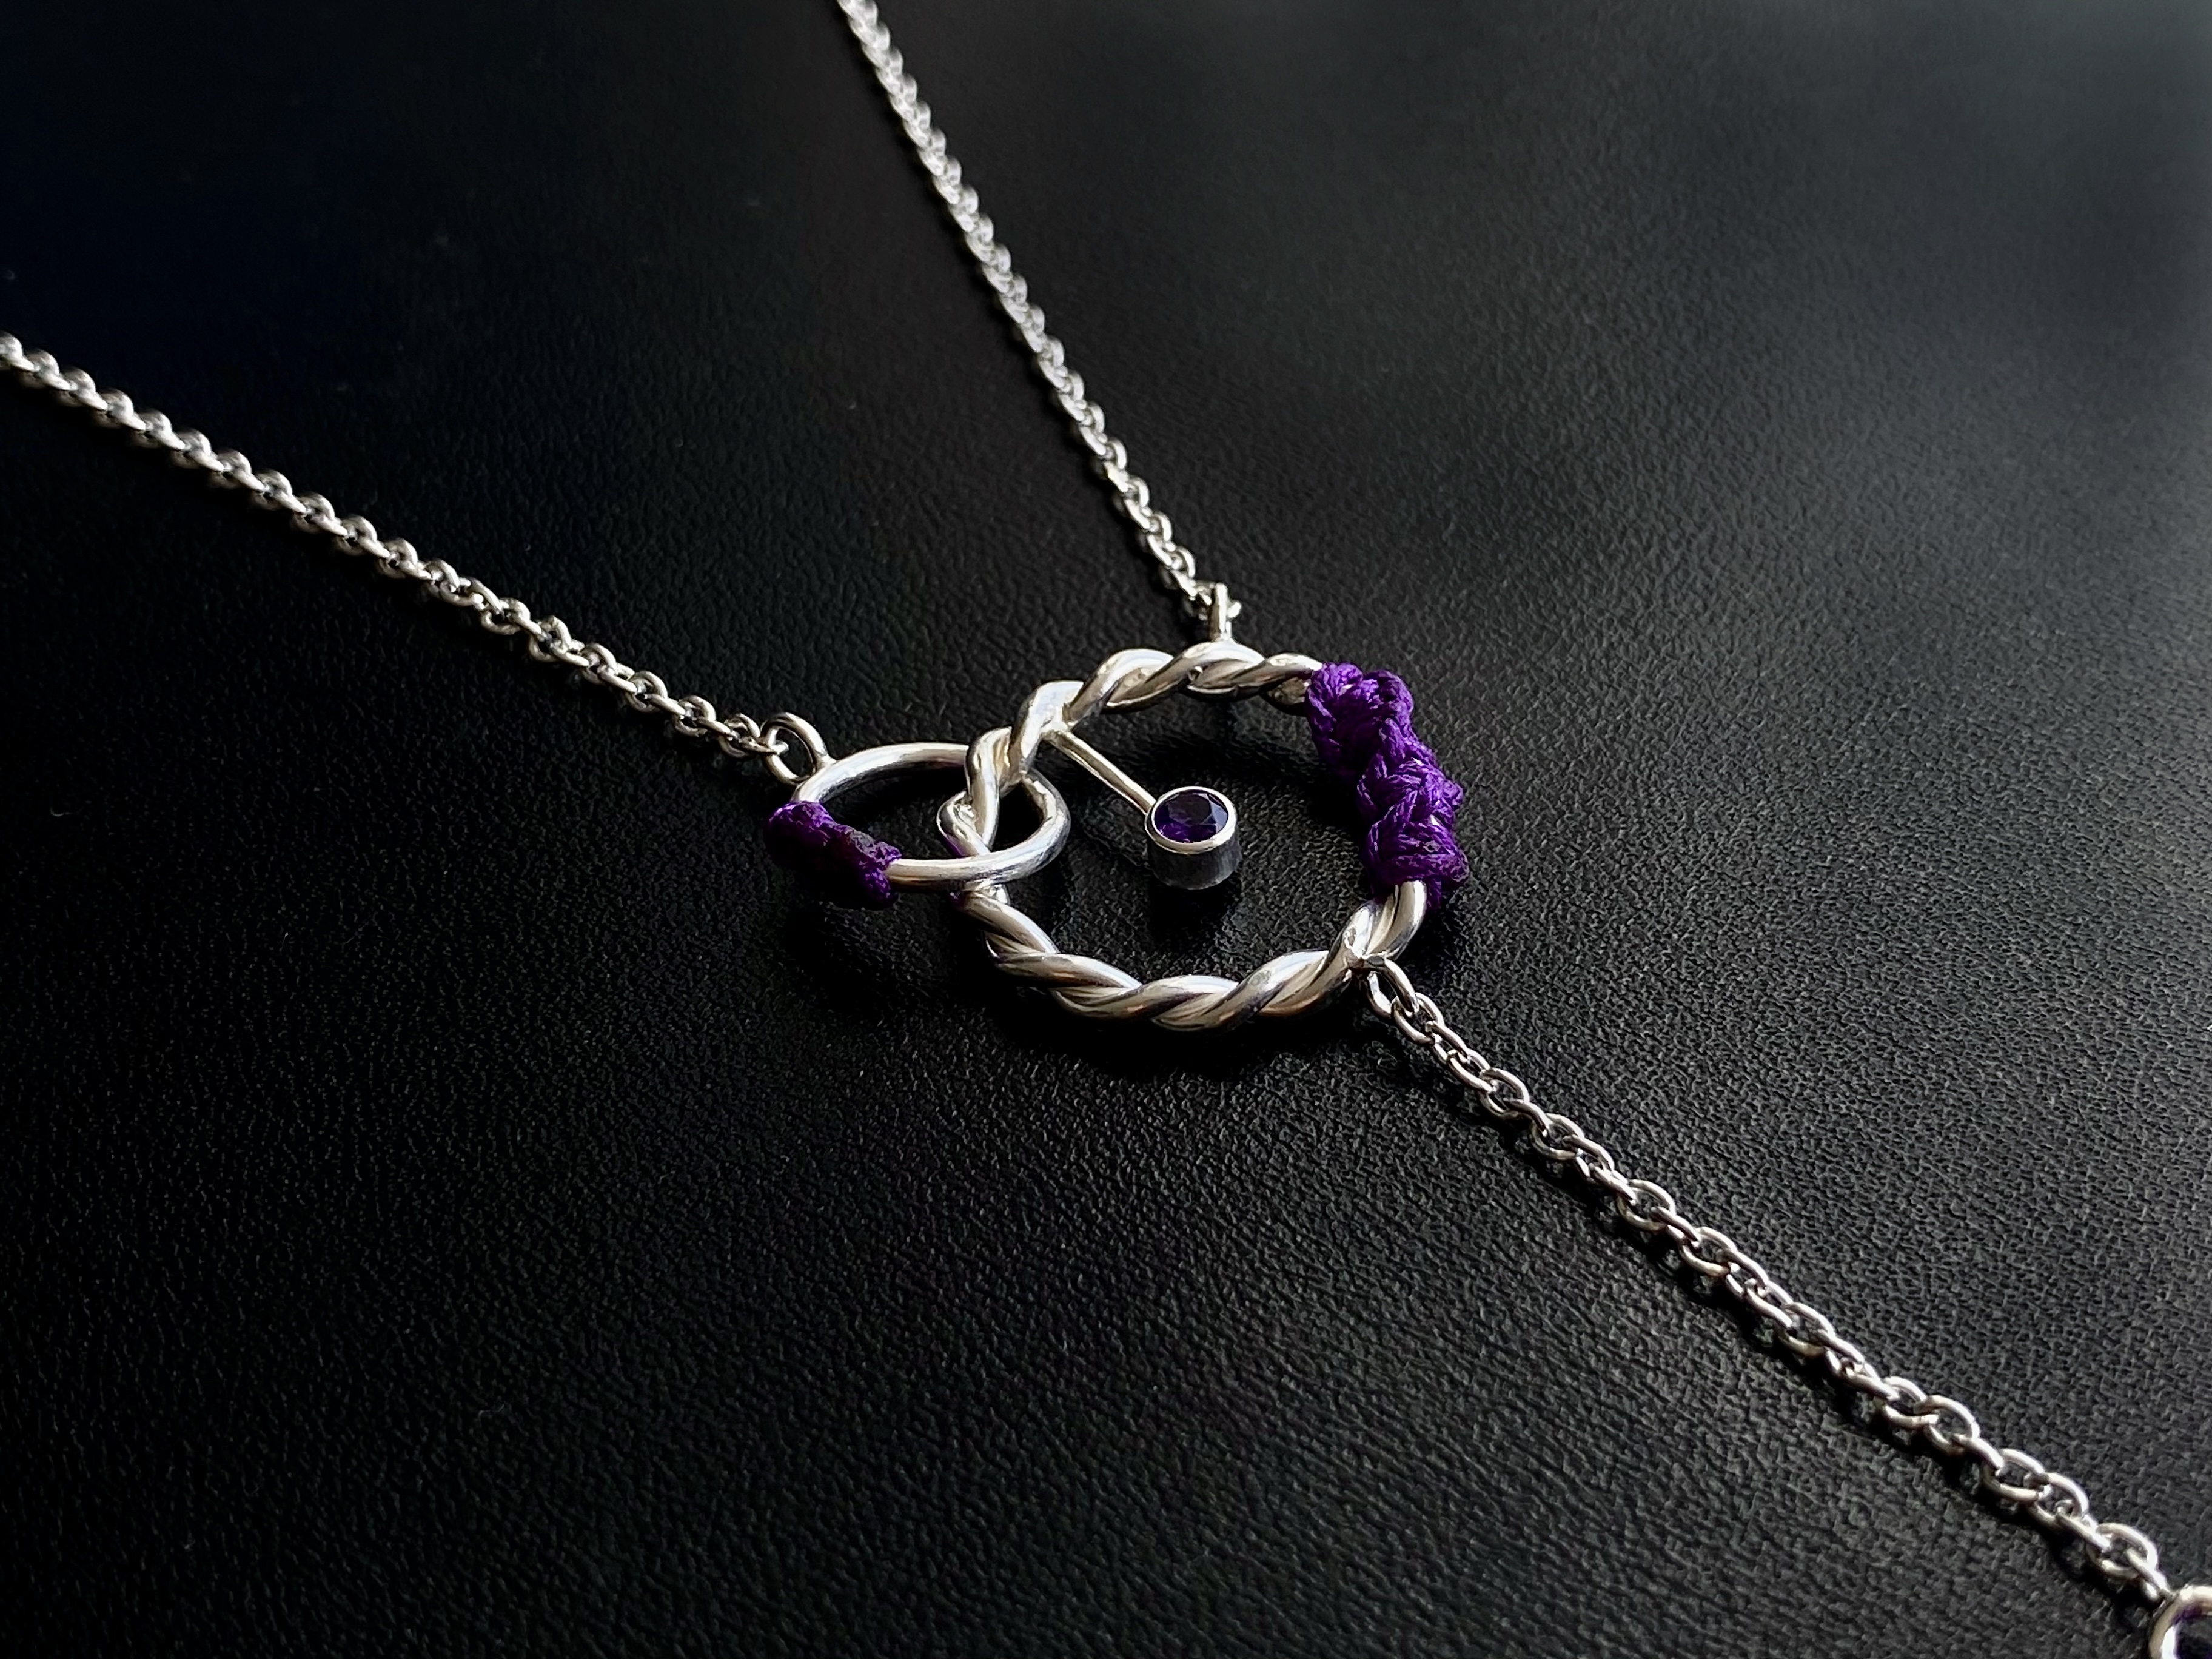 Knot Necklace